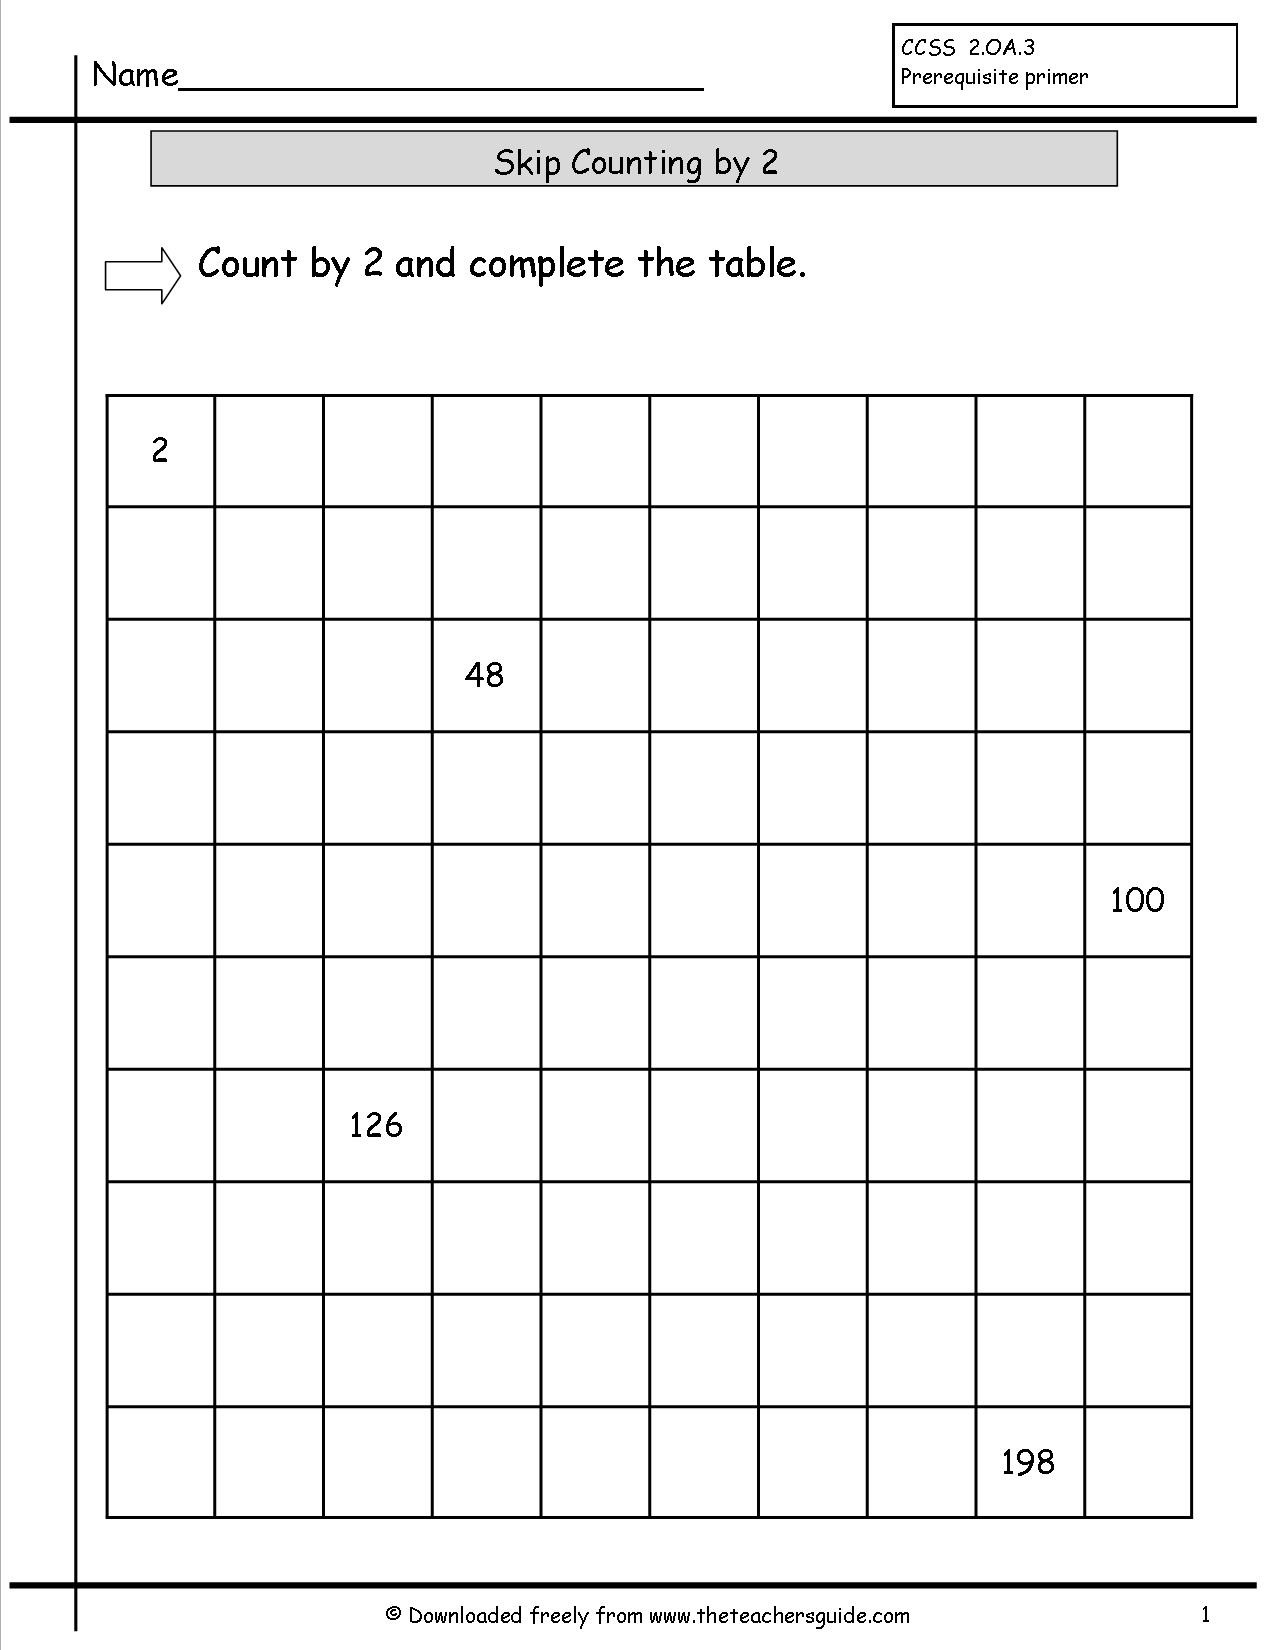 Free Math Worksheets Second Grade 2 Skip Counting Skip Counting by 20